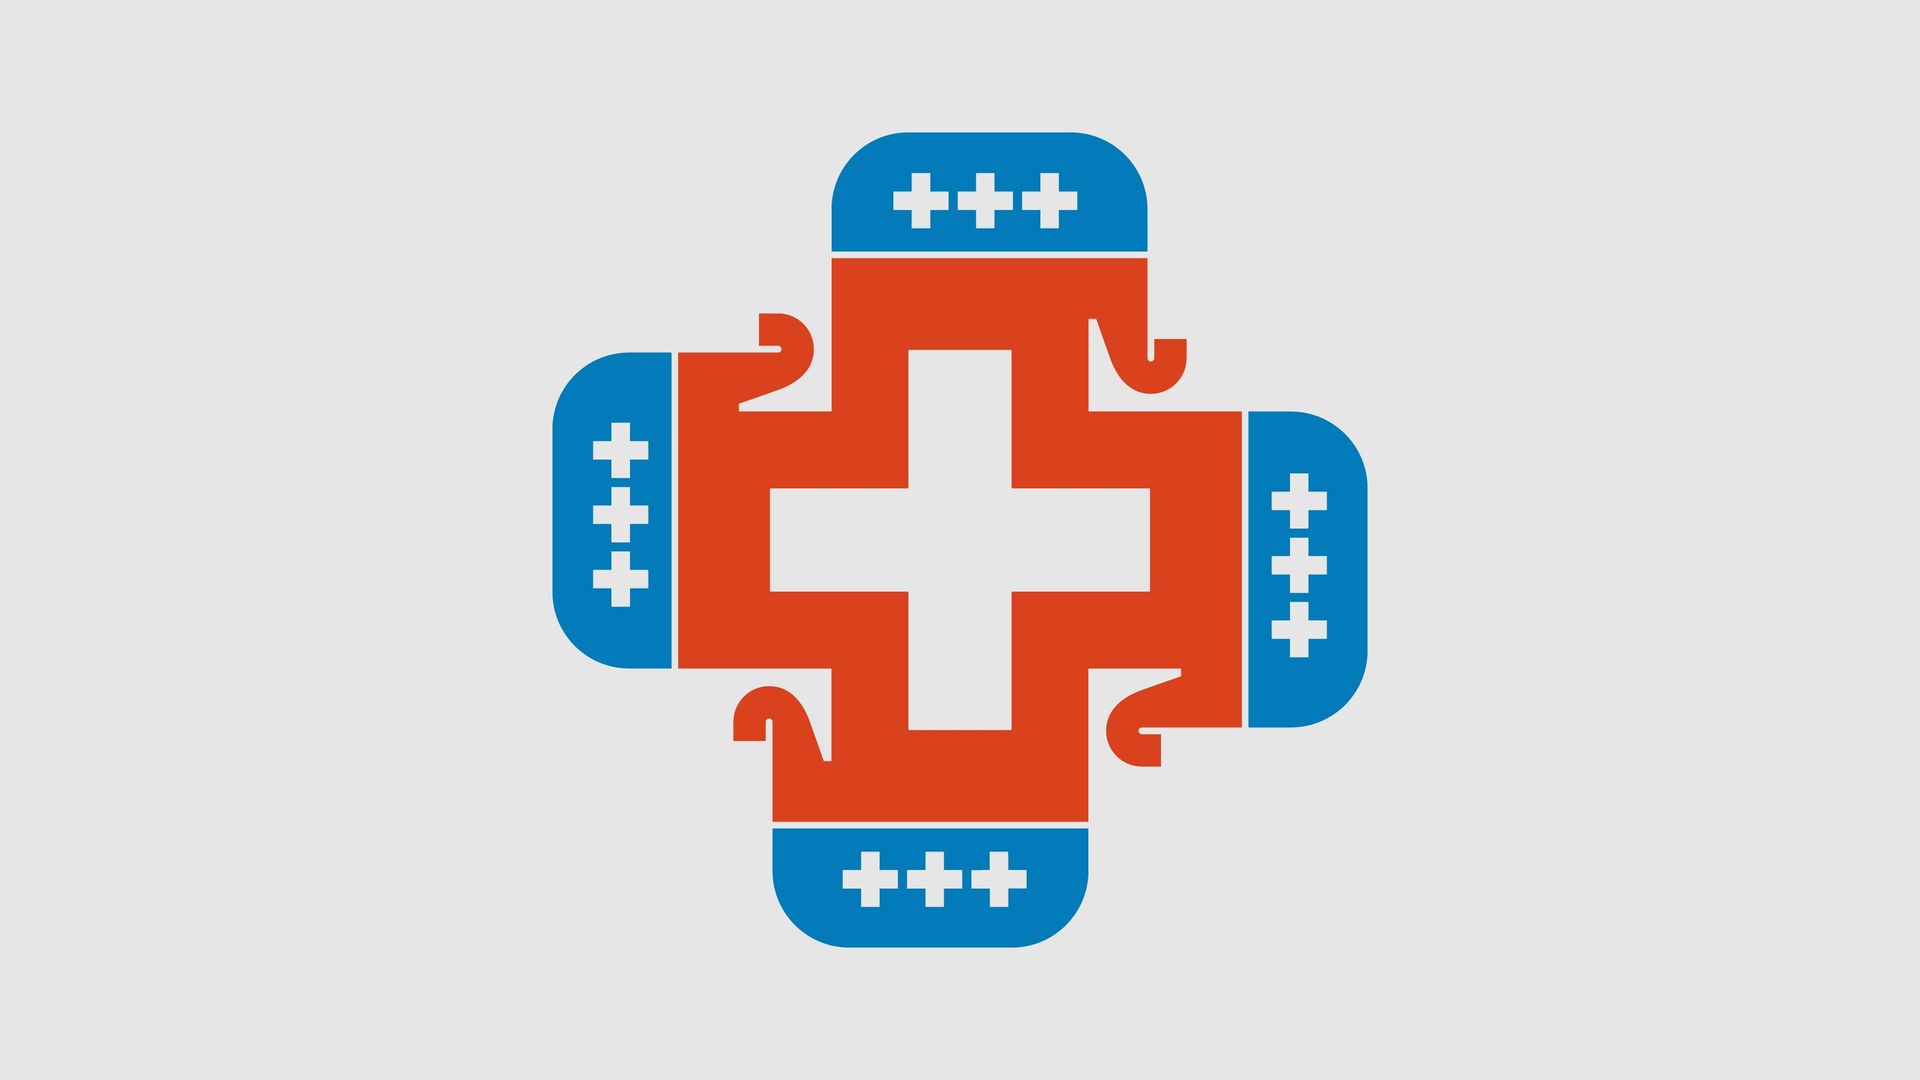 Illustration of a health care symbol with Republican elephants.